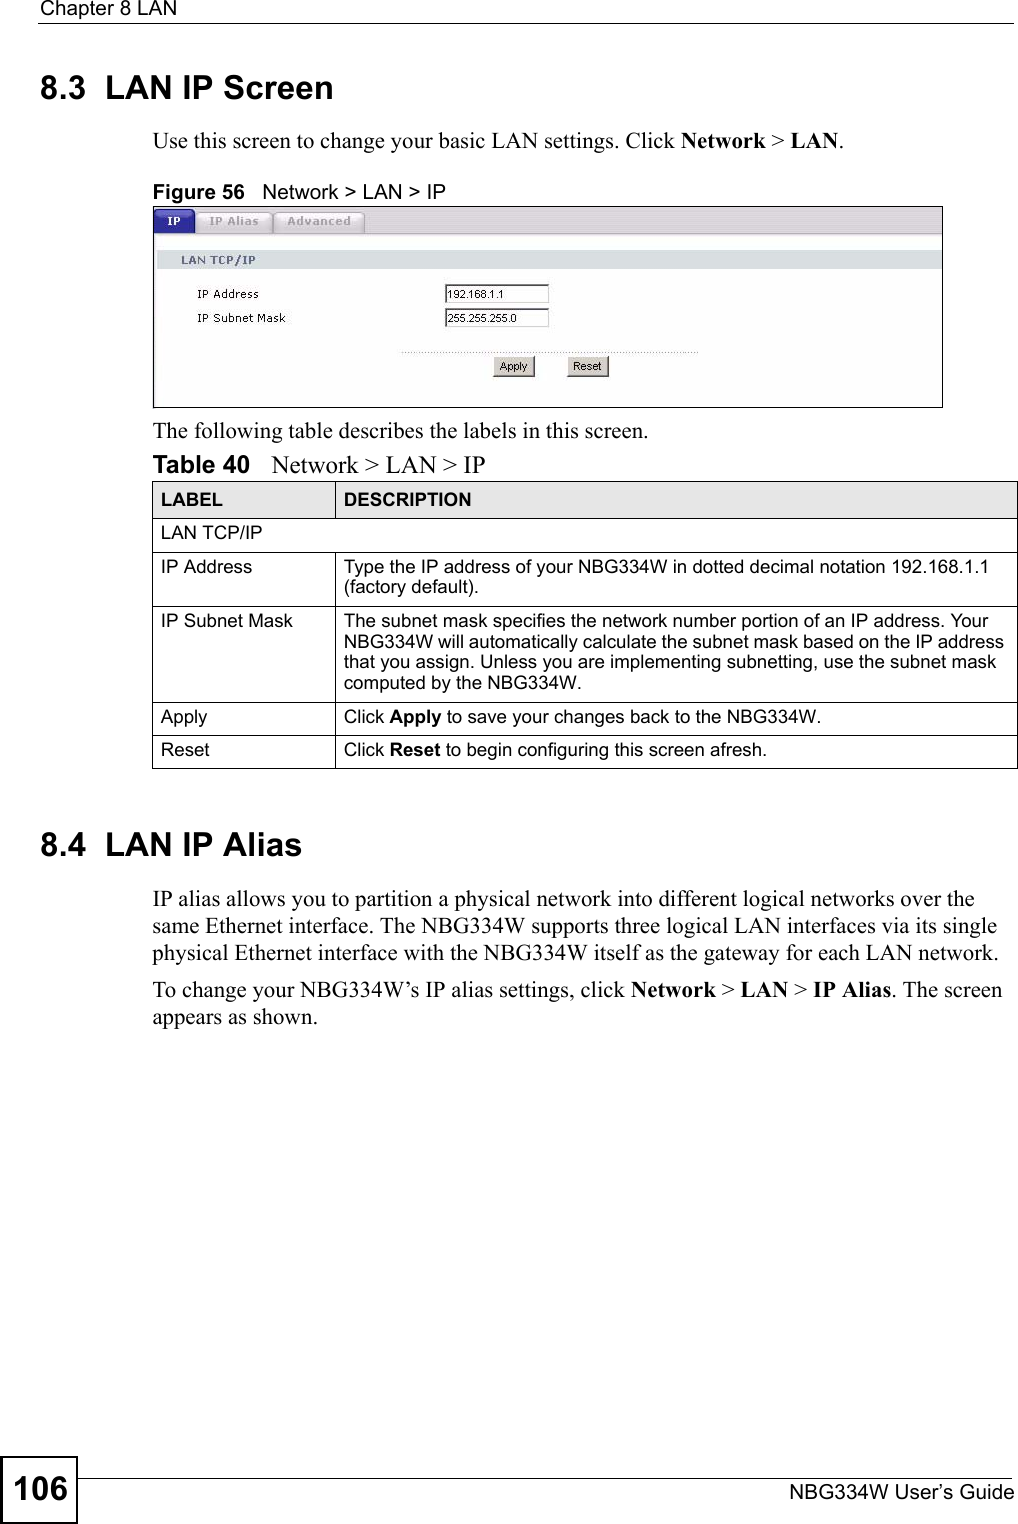 Chapter 8 LANNBG334W User’s Guide1068.3  LAN IP ScreenUse this screen to change your basic LAN settings. Click Network &gt; LAN.Figure 56   Network &gt; LAN &gt; IP The following table describes the labels in this screen.8.4  LAN IP Alias IP alias allows you to partition a physical network into different logical networks over the same Ethernet interface. The NBG334W supports three logical LAN interfaces via its single physical Ethernet interface with the NBG334W itself as the gateway for each LAN network.To change your NBG334W’s IP alias settings, click Network &gt; LAN &gt; IP Alias. The screen appears as shown.Table 40   Network &gt; LAN &gt; IPLABEL DESCRIPTIONLAN TCP/IPIP Address Type the IP address of your NBG334W in dotted decimal notation 192.168.1.1 (factory default).IP Subnet Mask The subnet mask specifies the network number portion of an IP address. Your NBG334W will automatically calculate the subnet mask based on the IP address that you assign. Unless you are implementing subnetting, use the subnet mask computed by the NBG334W.Apply Click Apply to save your changes back to the NBG334W.Reset Click Reset to begin configuring this screen afresh.